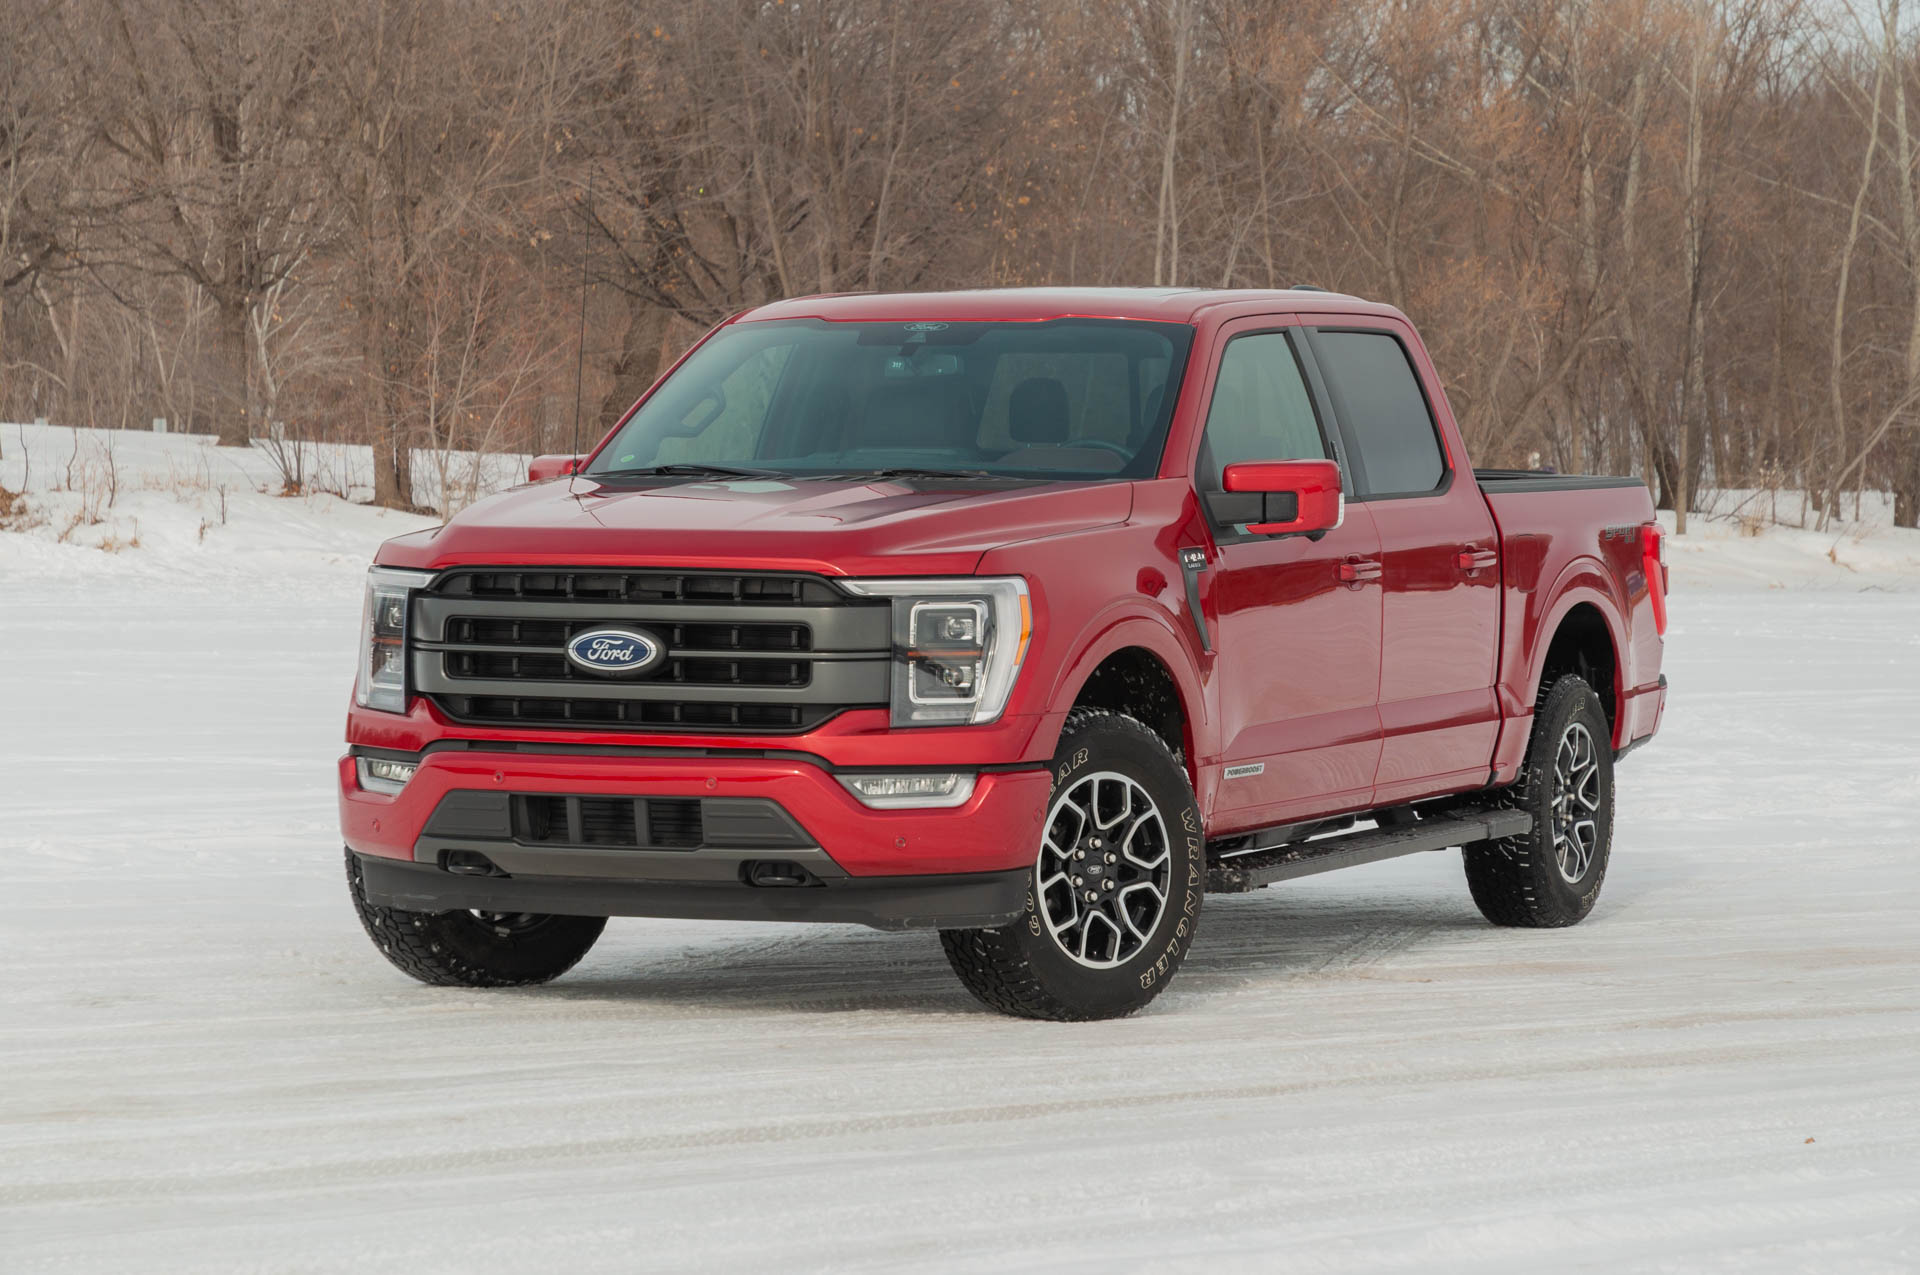 Review update: 2021 Ford F-150 Hybrid generates value through its generator